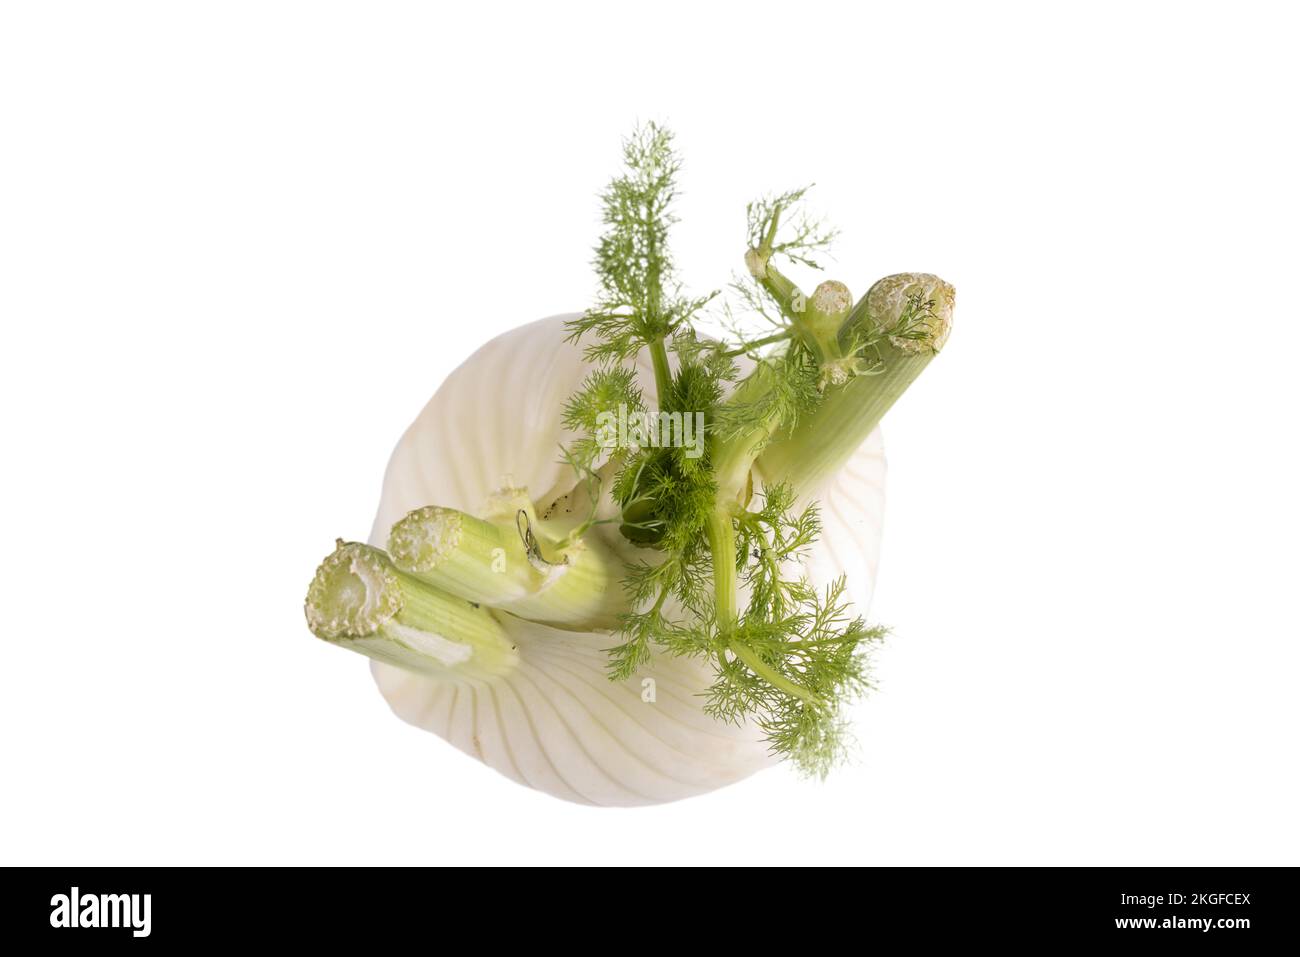 A Fennel on a transparent background Stock Photo